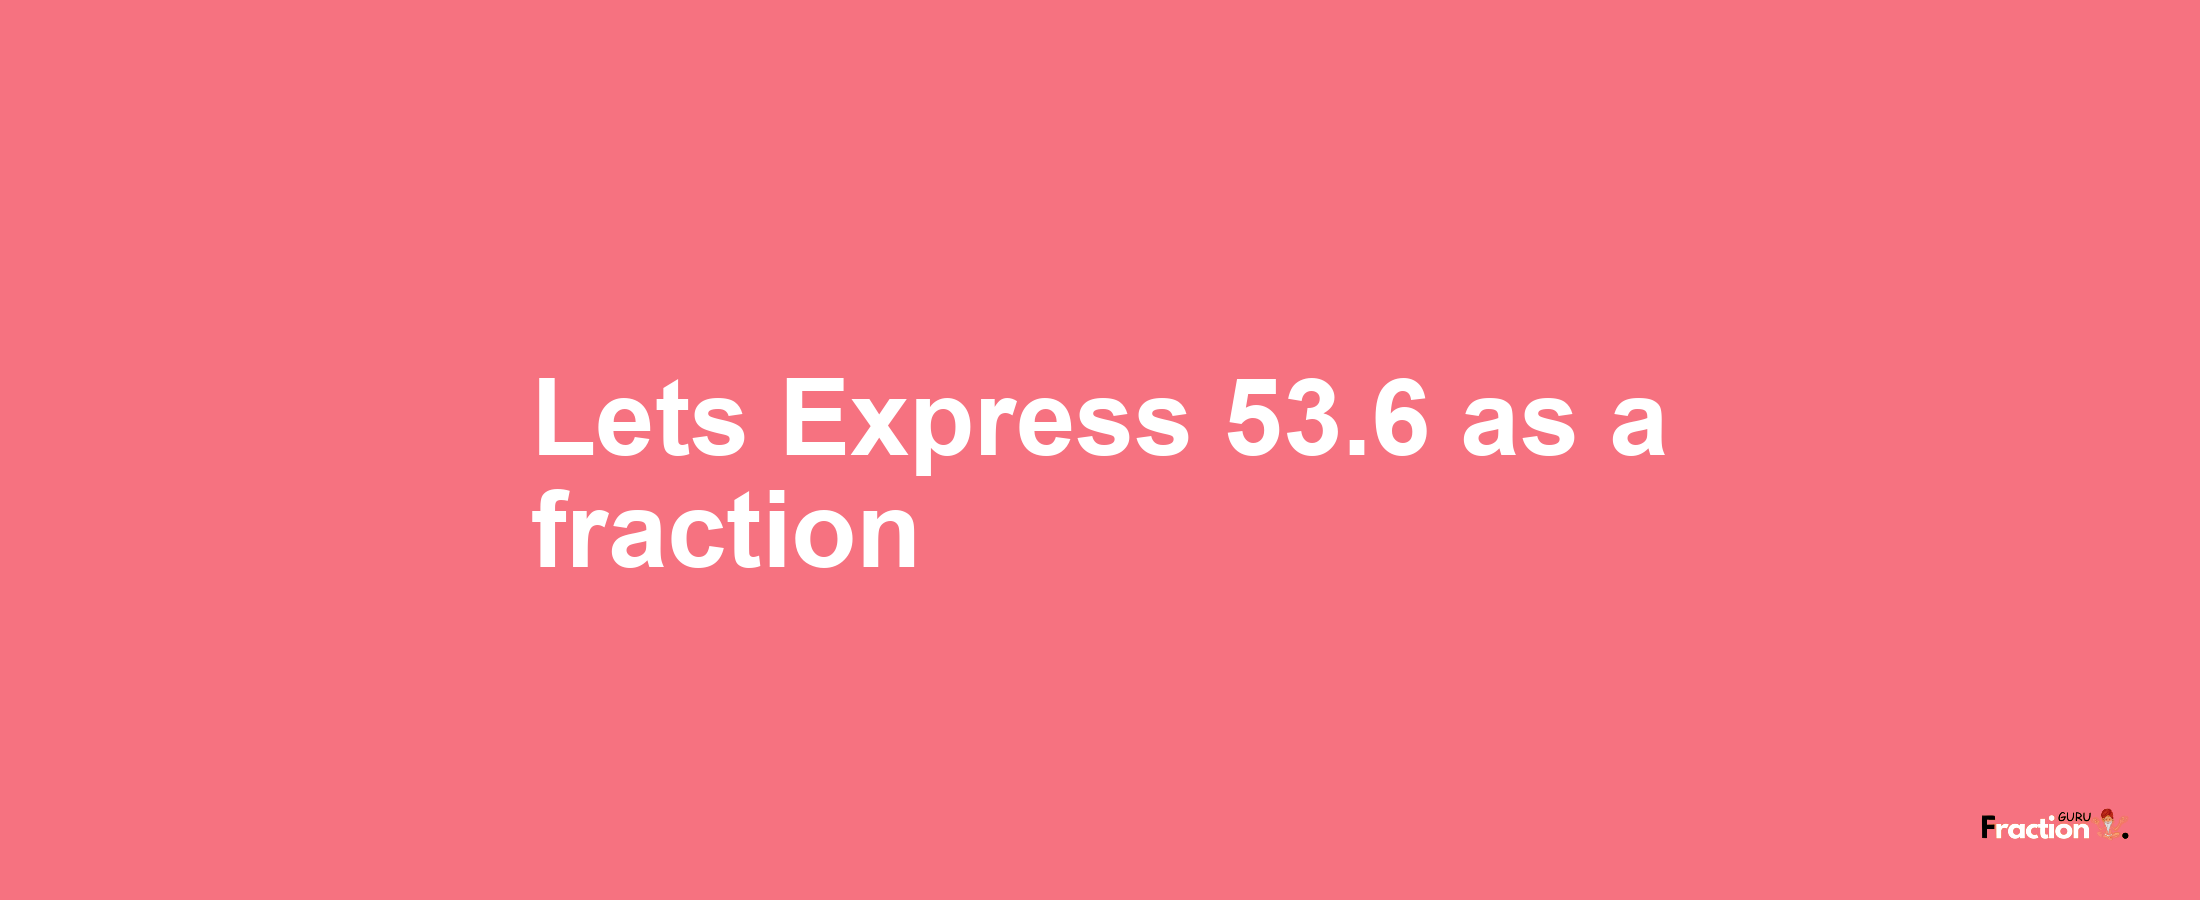 Lets Express 53.6 as afraction